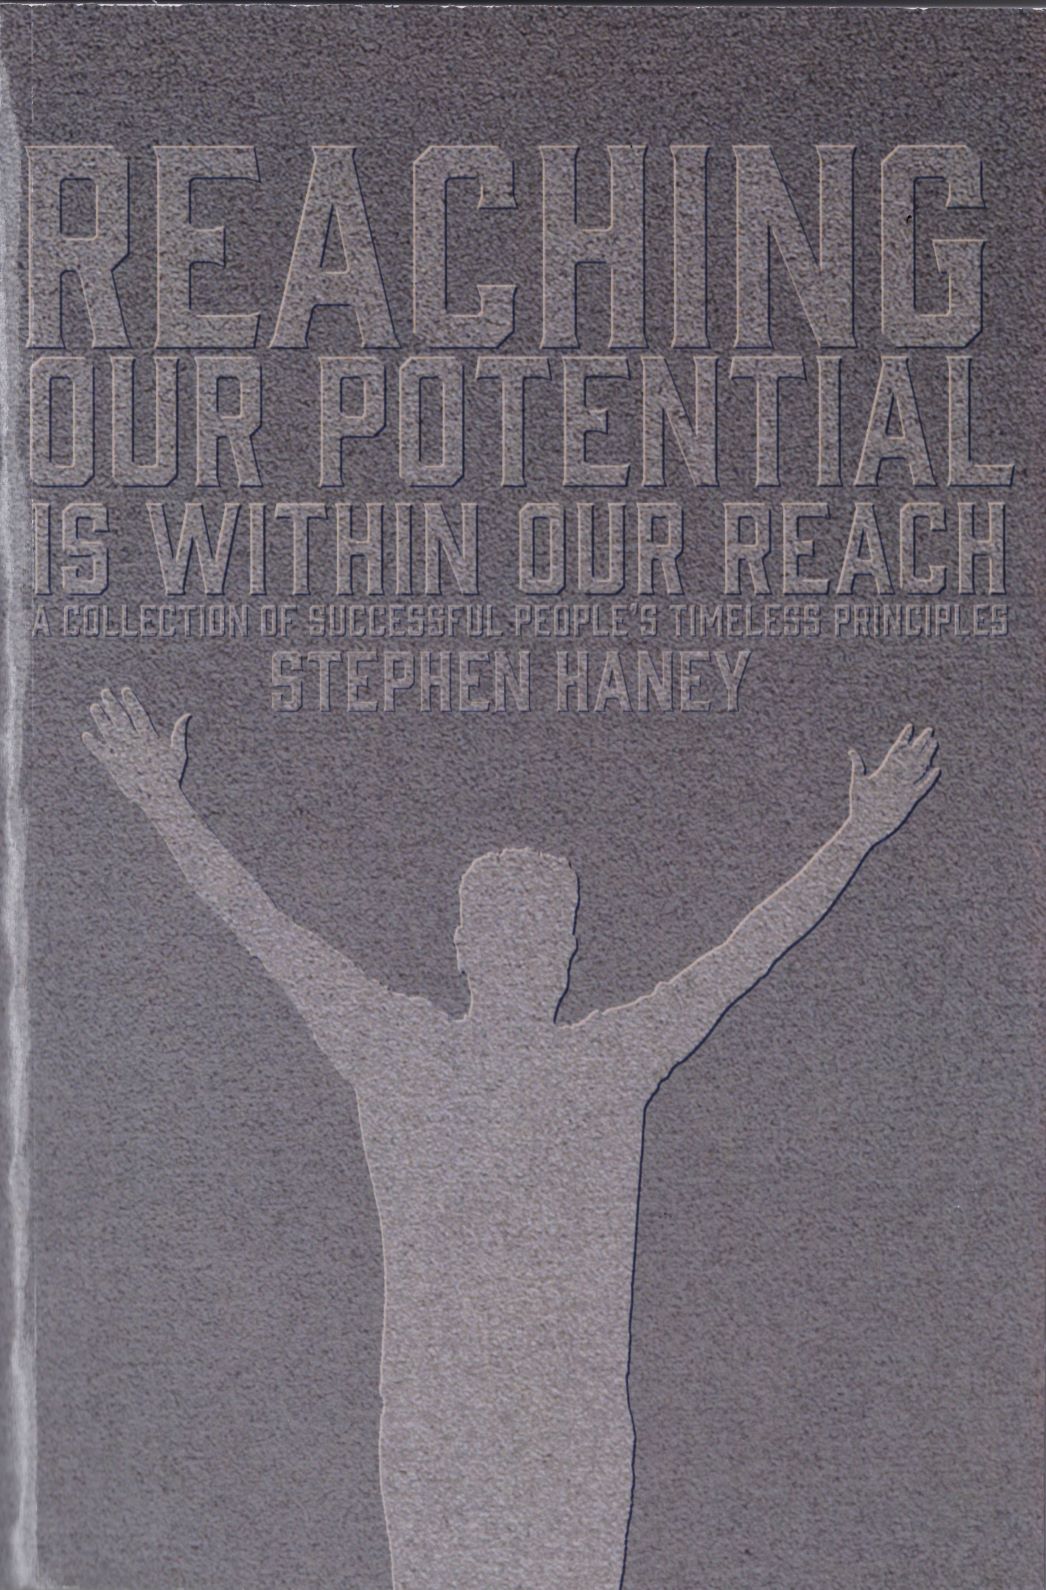 Reaching Our Potential - Stephen Haney